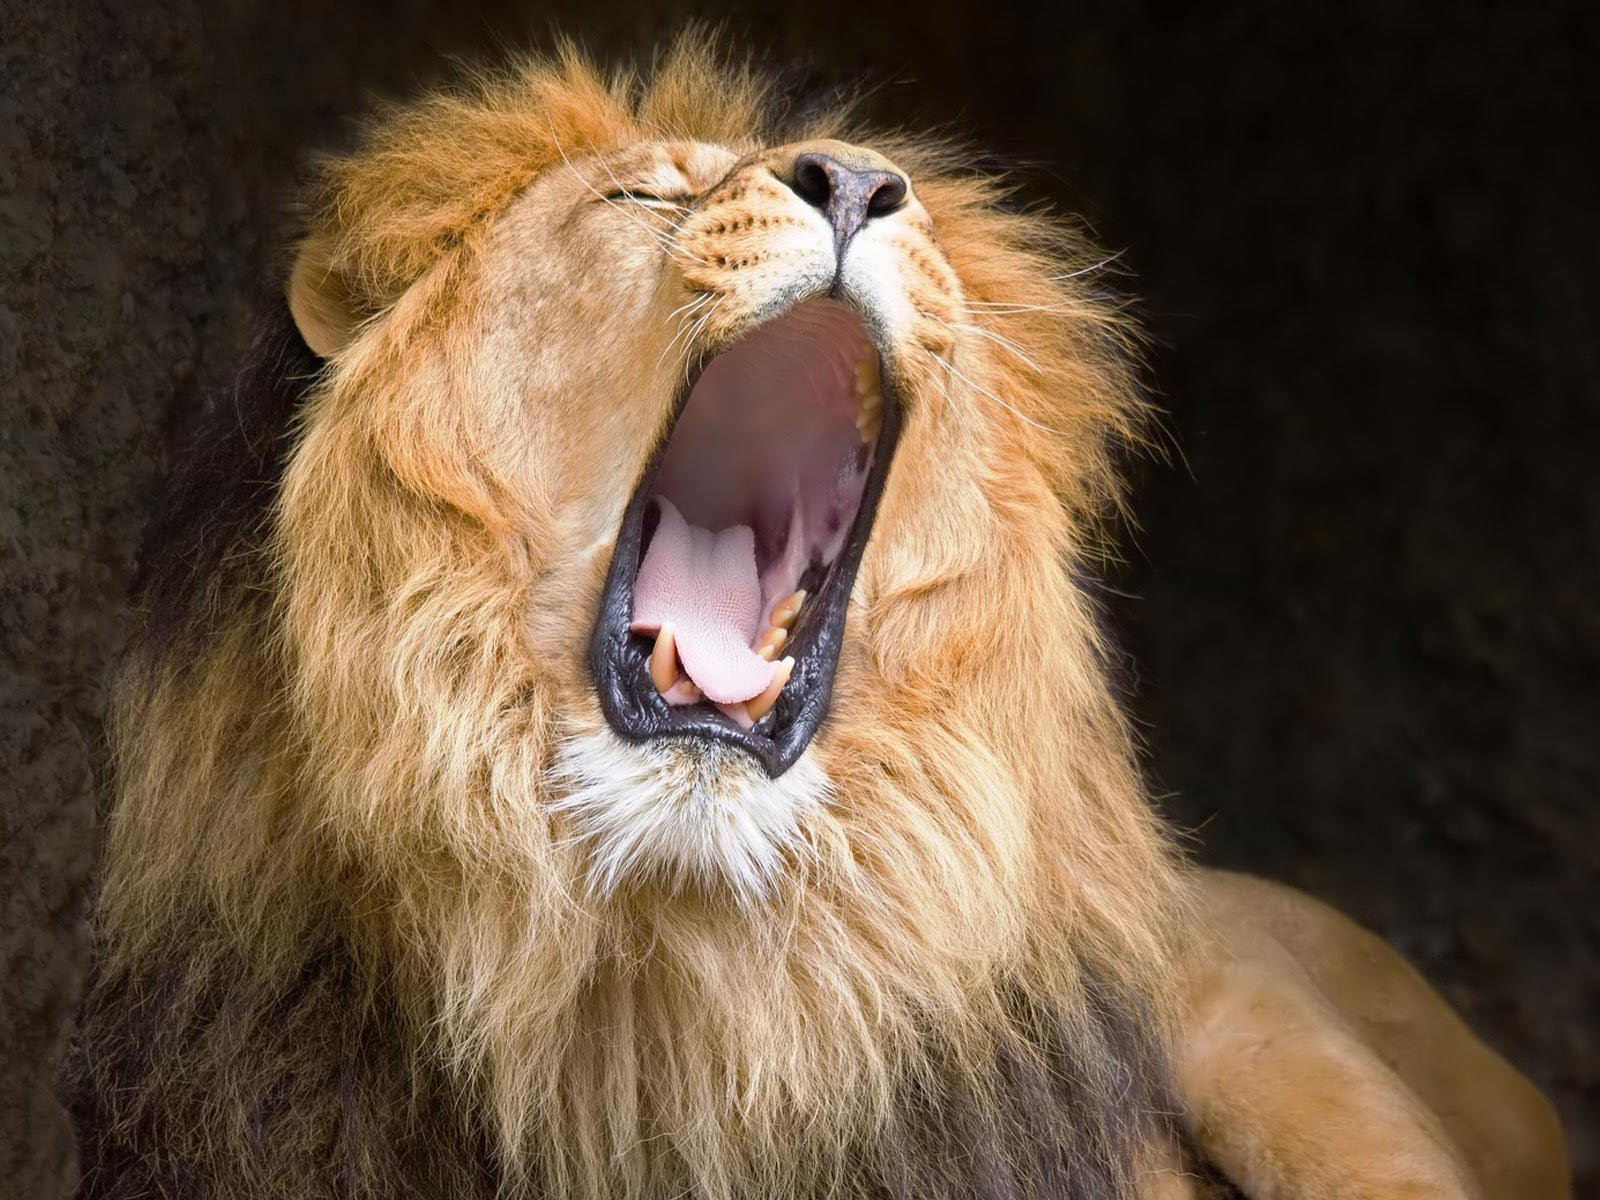 wallpapers Lion Roaring Wallpapers 1600x1200